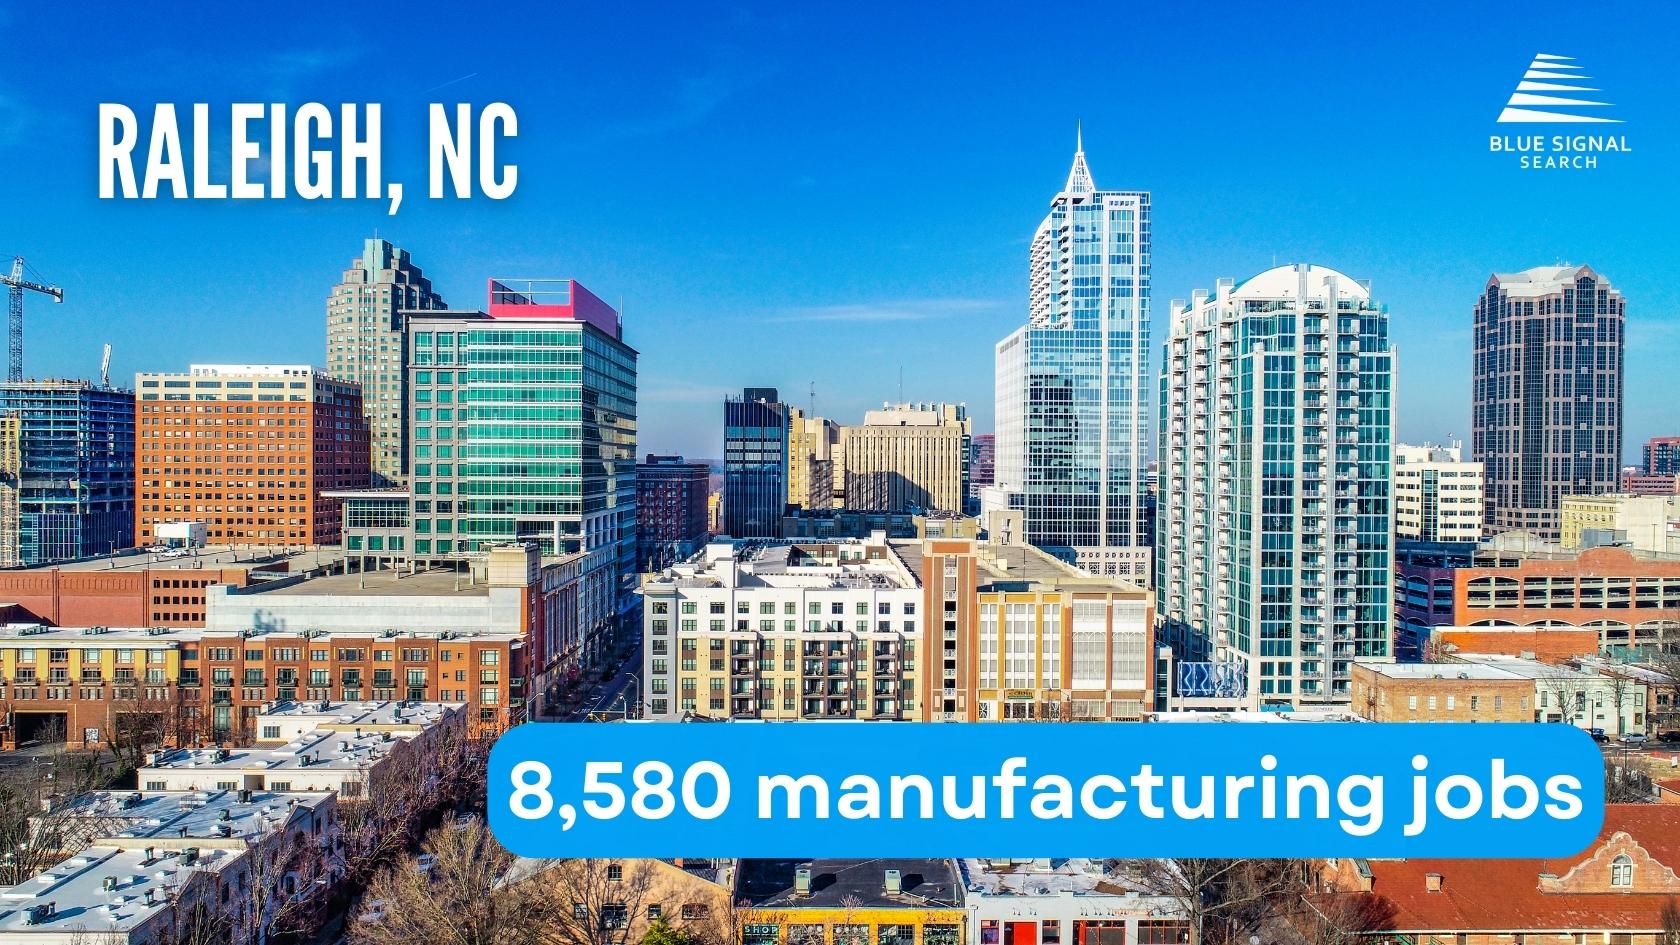 Skyline of Raleigh, NC with key manufacturing statistics highlighted.